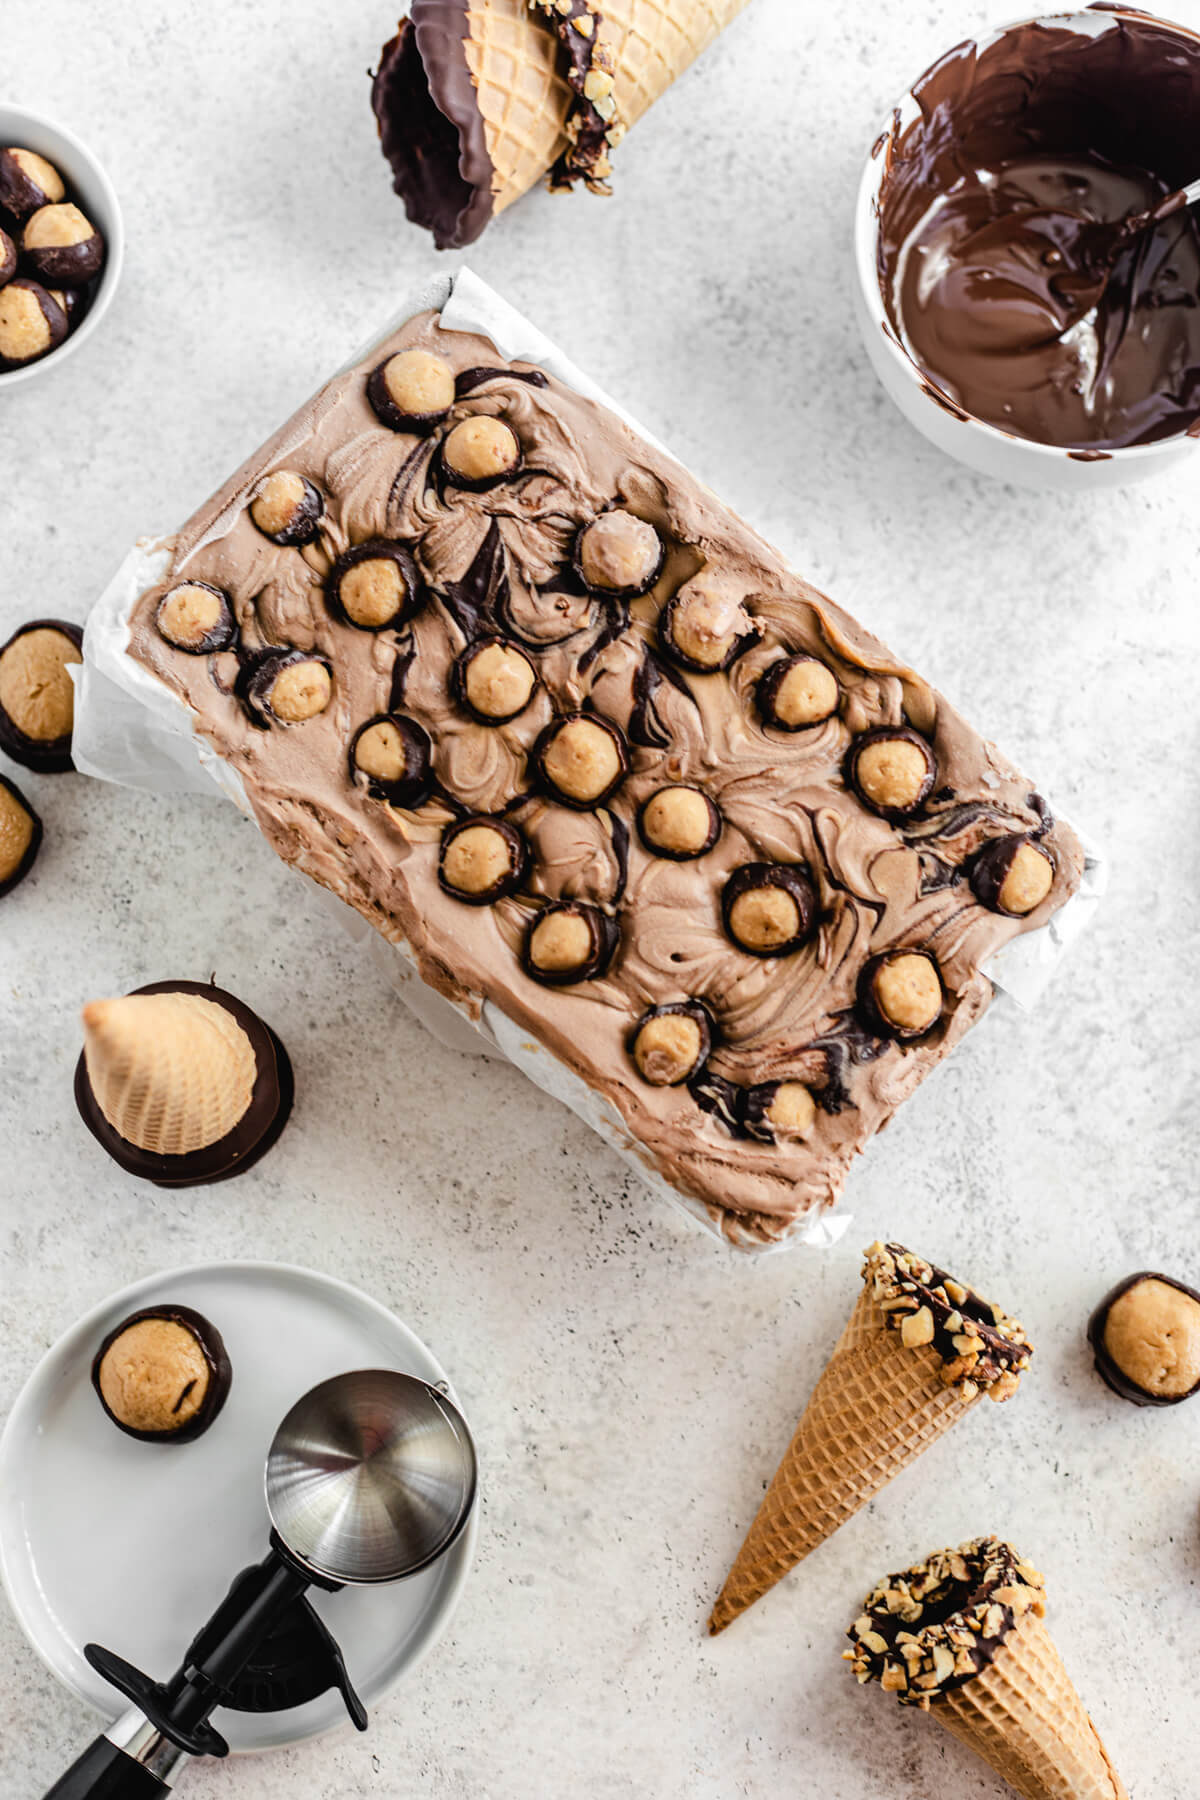 ice cream in a loaf pan with melted chocolate in a bowl, cones and buckeye truffles around it